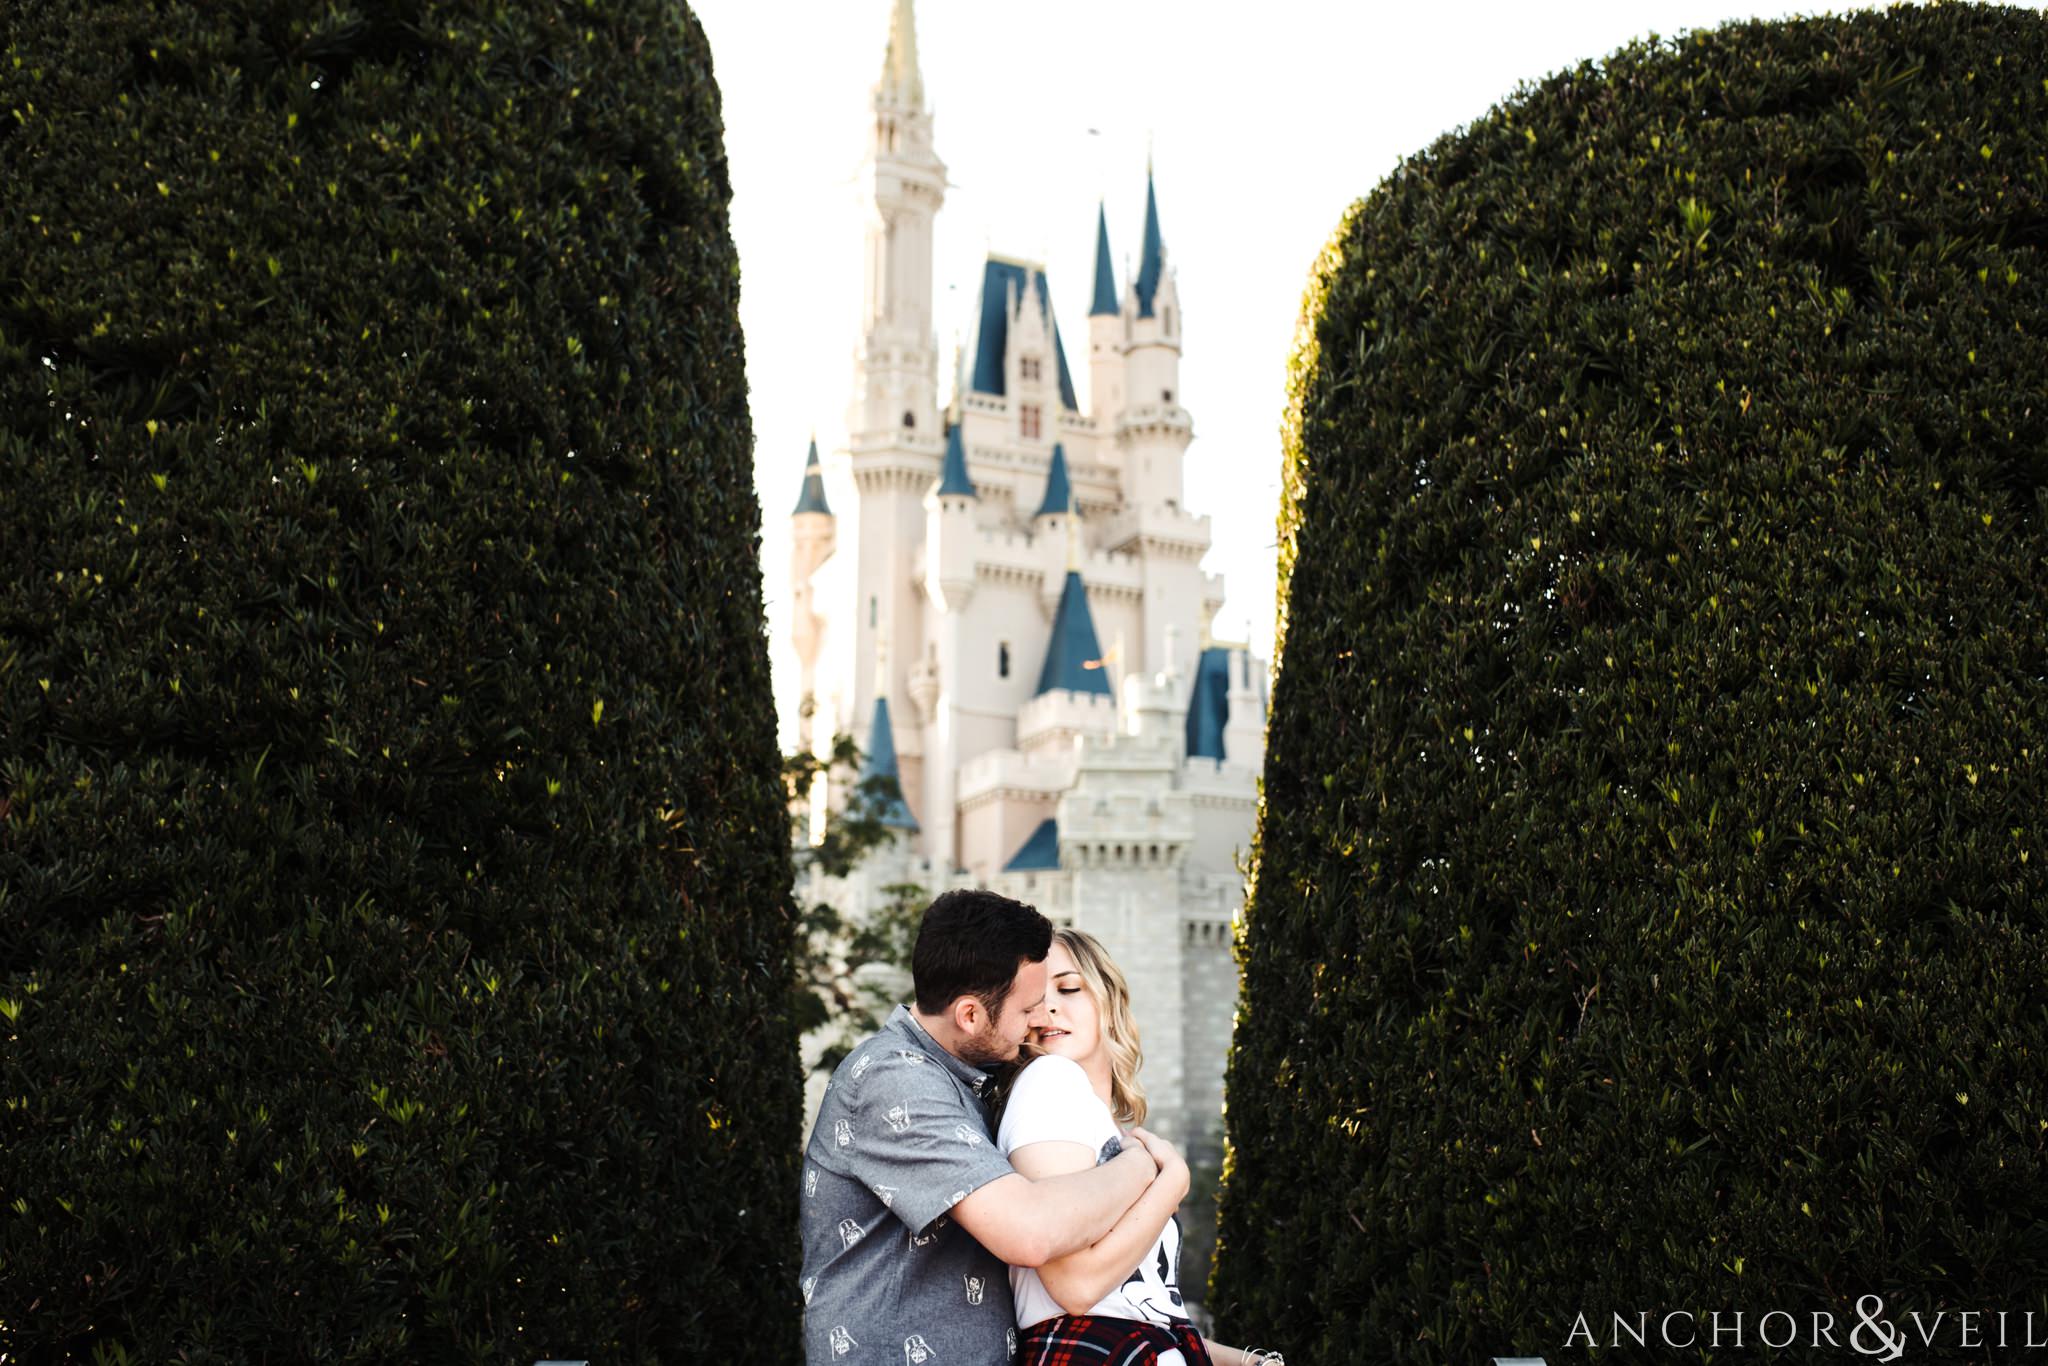 kissing in between the trees with the castle in the back during their Disney world engagement session at Disney's Magic Kingdom